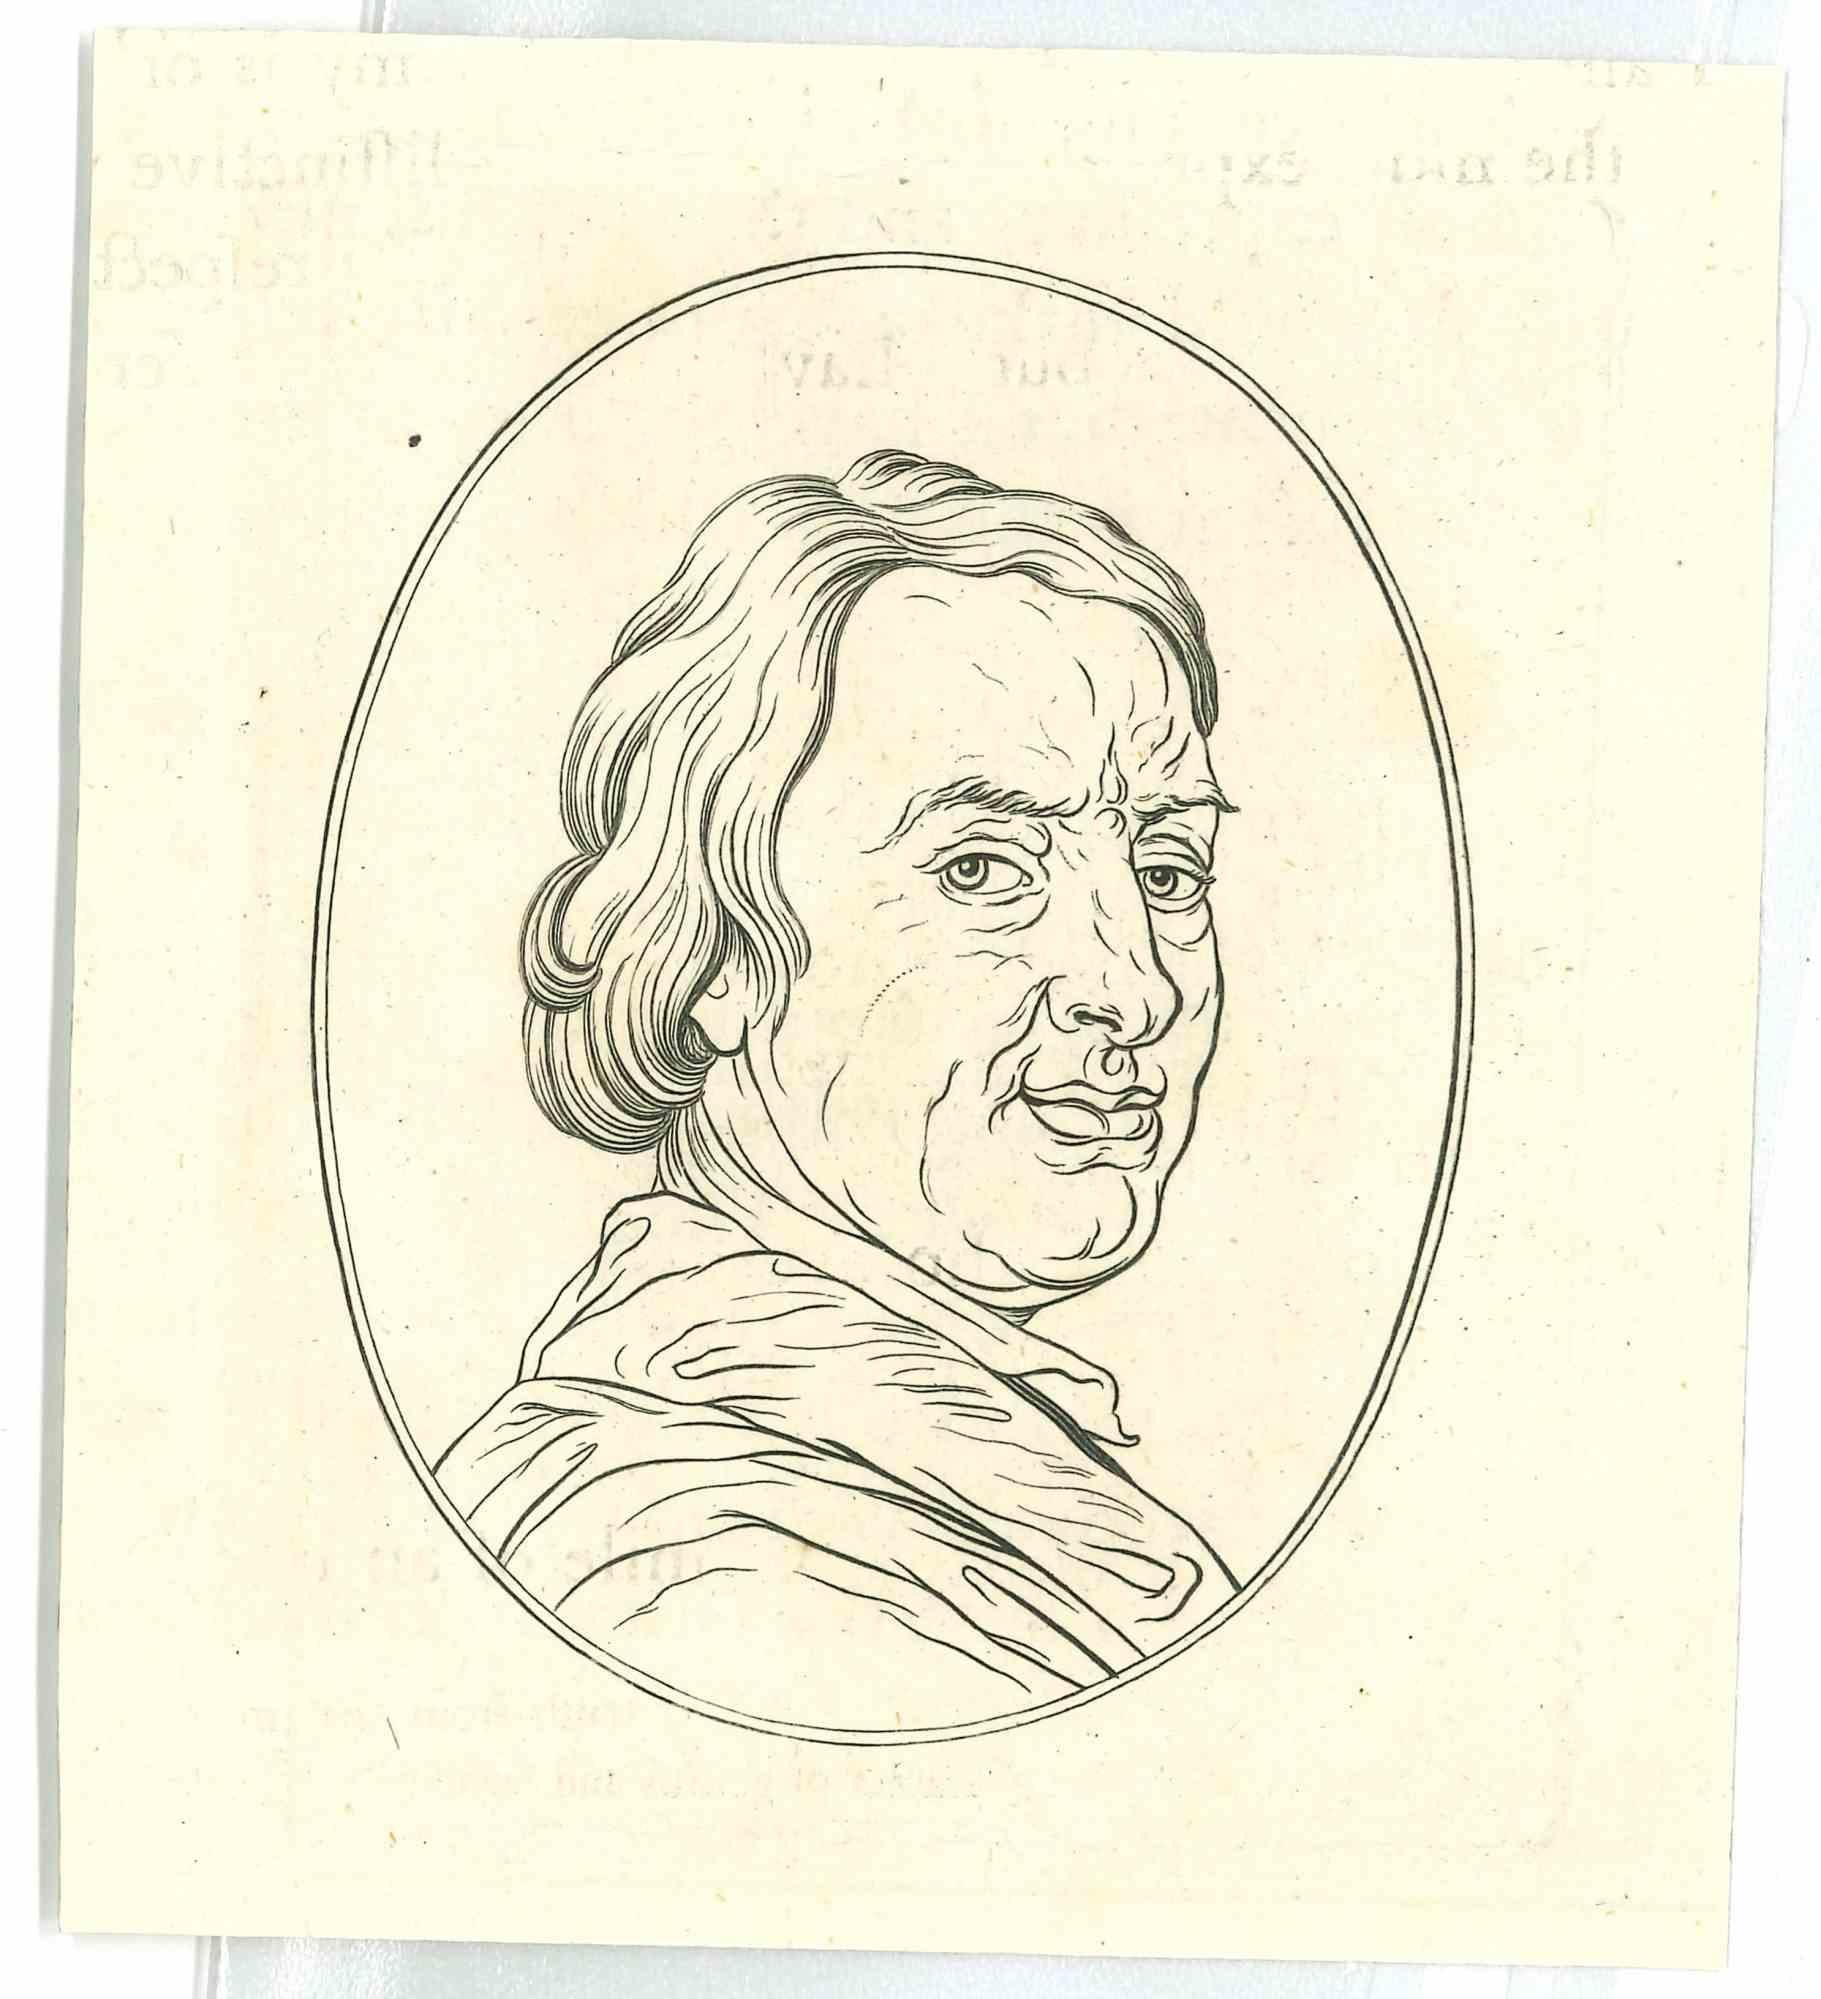 The Physiognomy - Portrait is an original etching artwork realized by Thomas Holloway for Johann Caspar Lavater's "Essays on Physiognomy, Designed to Promote the Knowledge and the Love of Mankind", London, Bensley, 1810. 

With the note on the